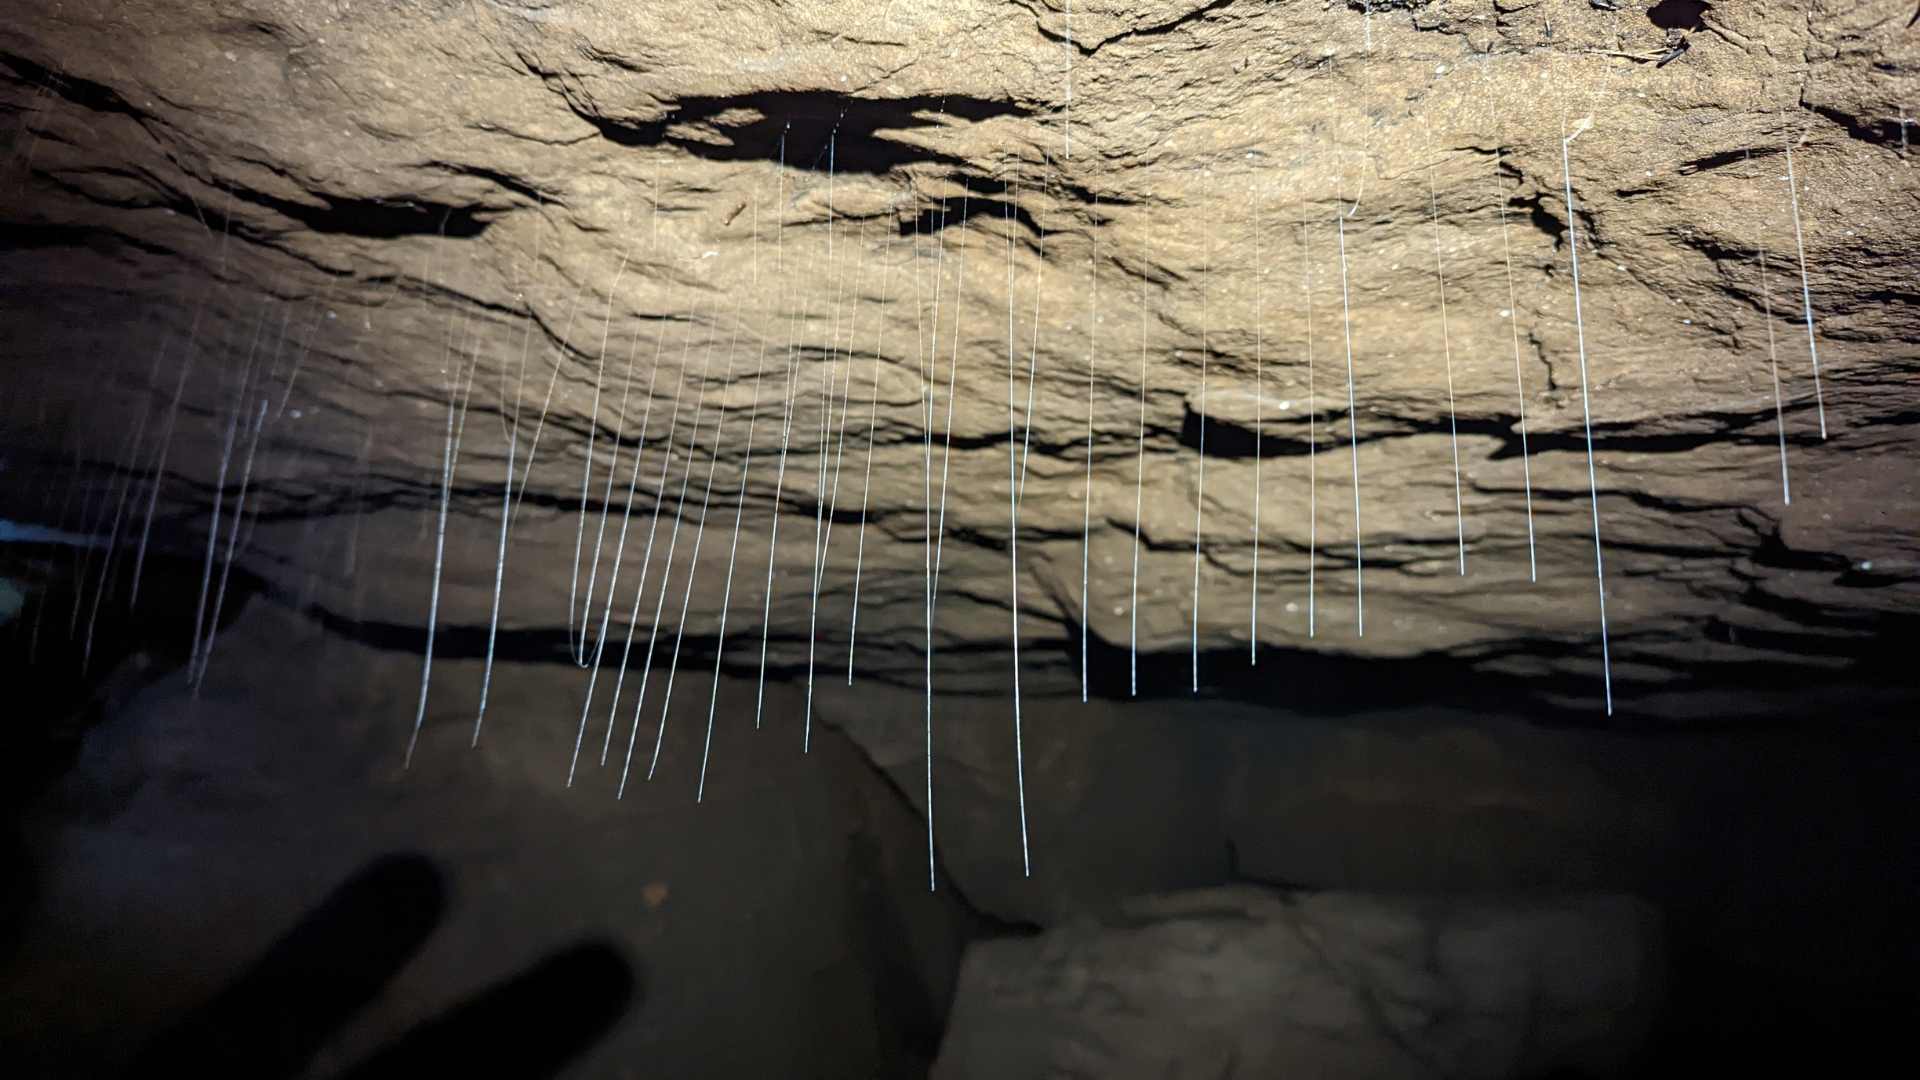 Stalactite and Stalagmite formation in Krem Mawpun, learn more about nature with the ChaloHoppo short escape.